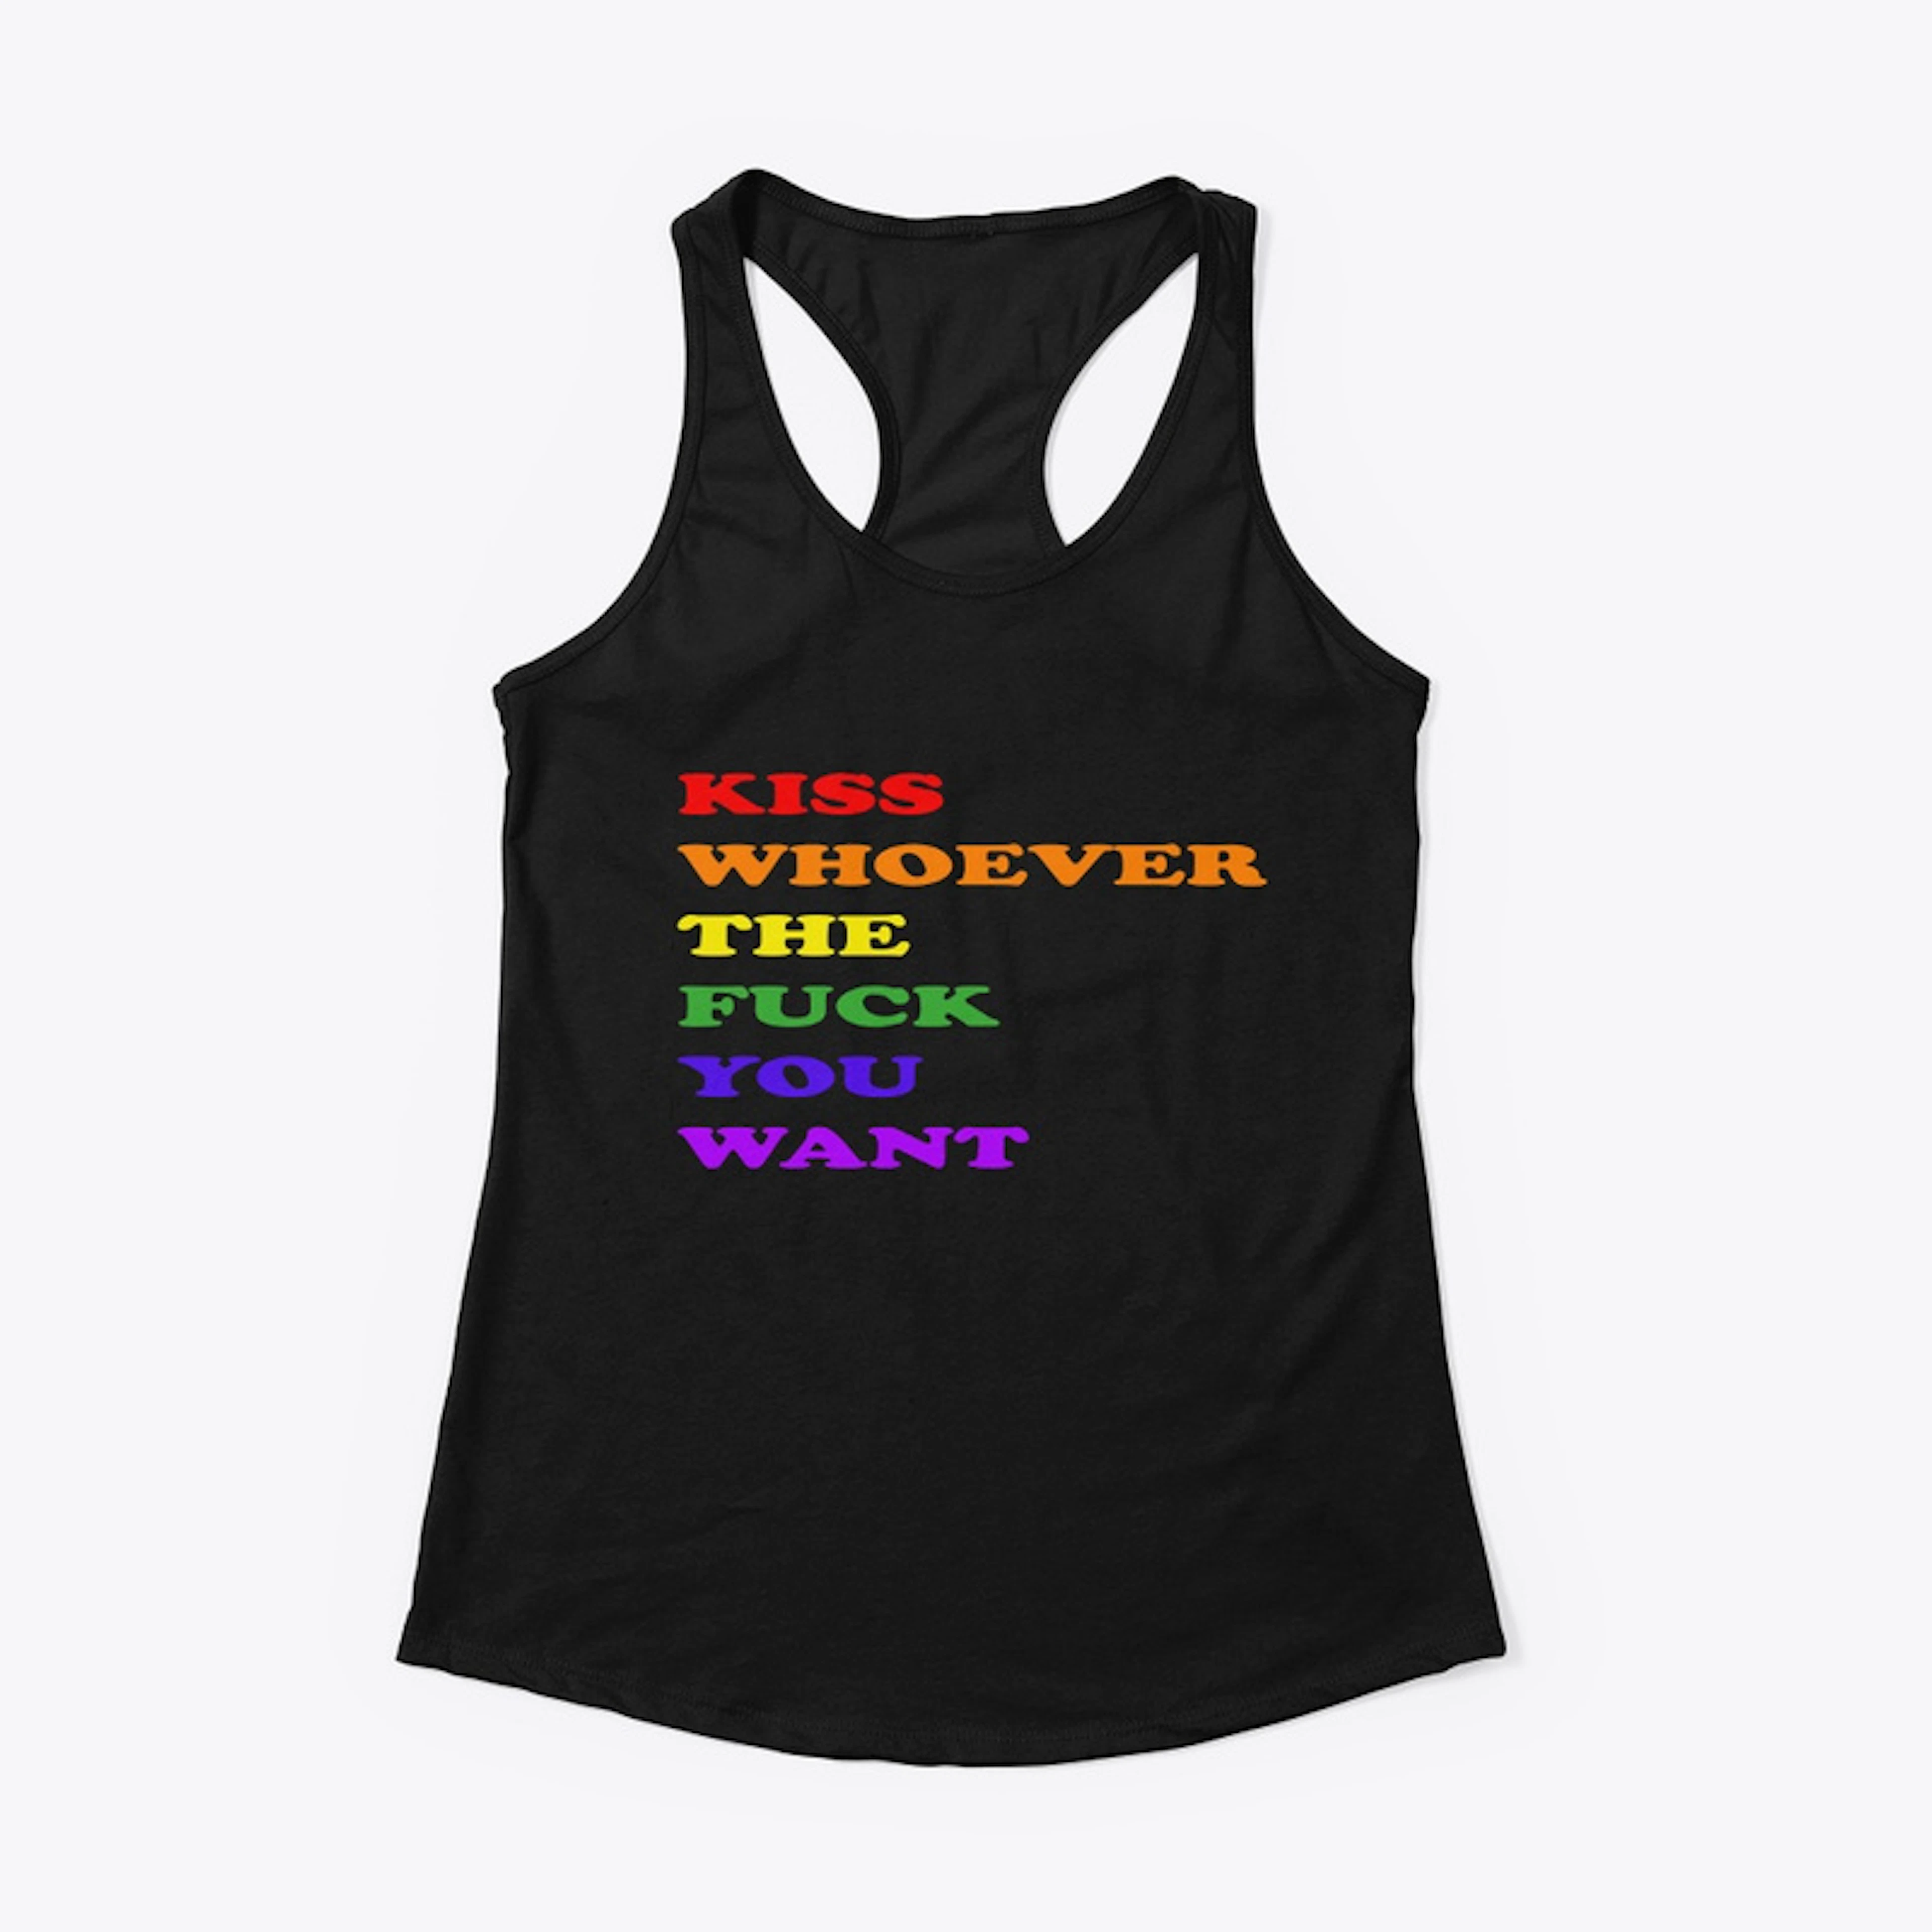 KISS WHOEVER YOU WANT! Apparel